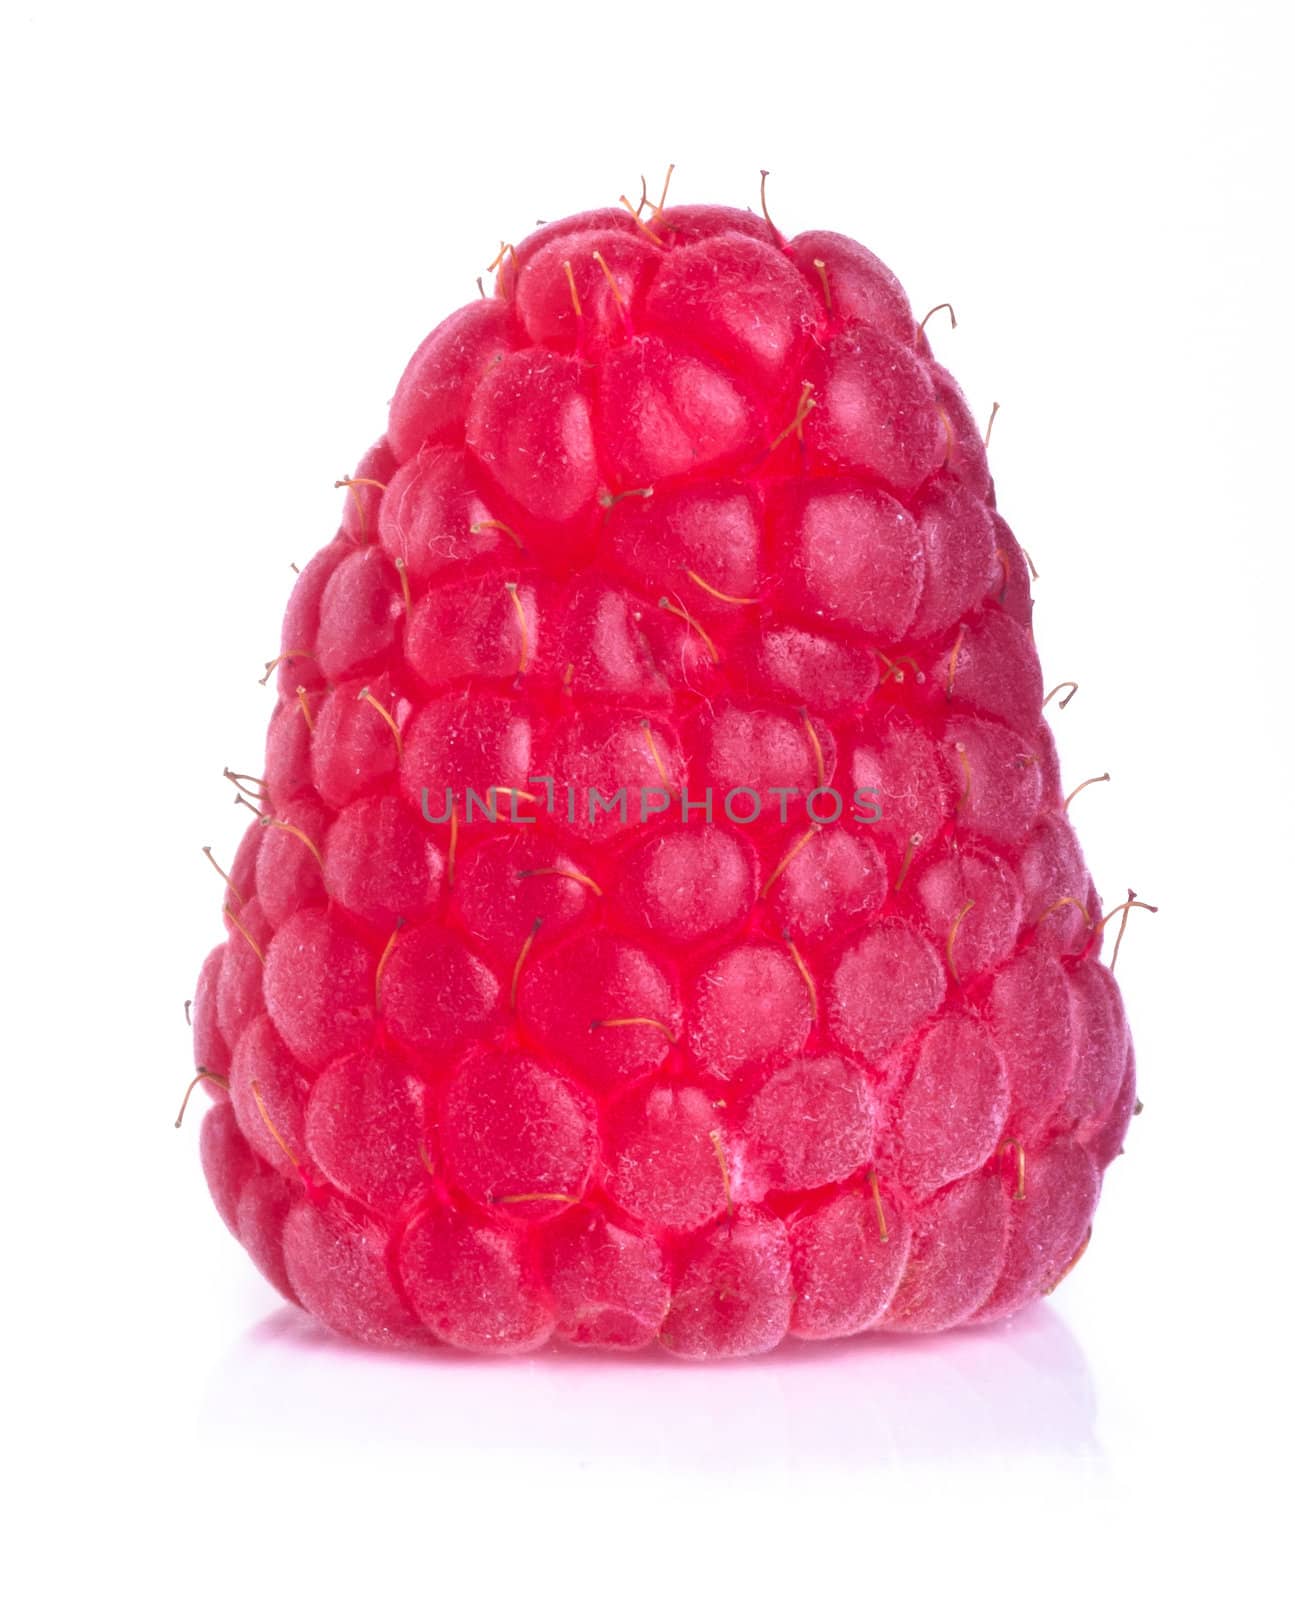 raspberry isolated on white background by heinteh